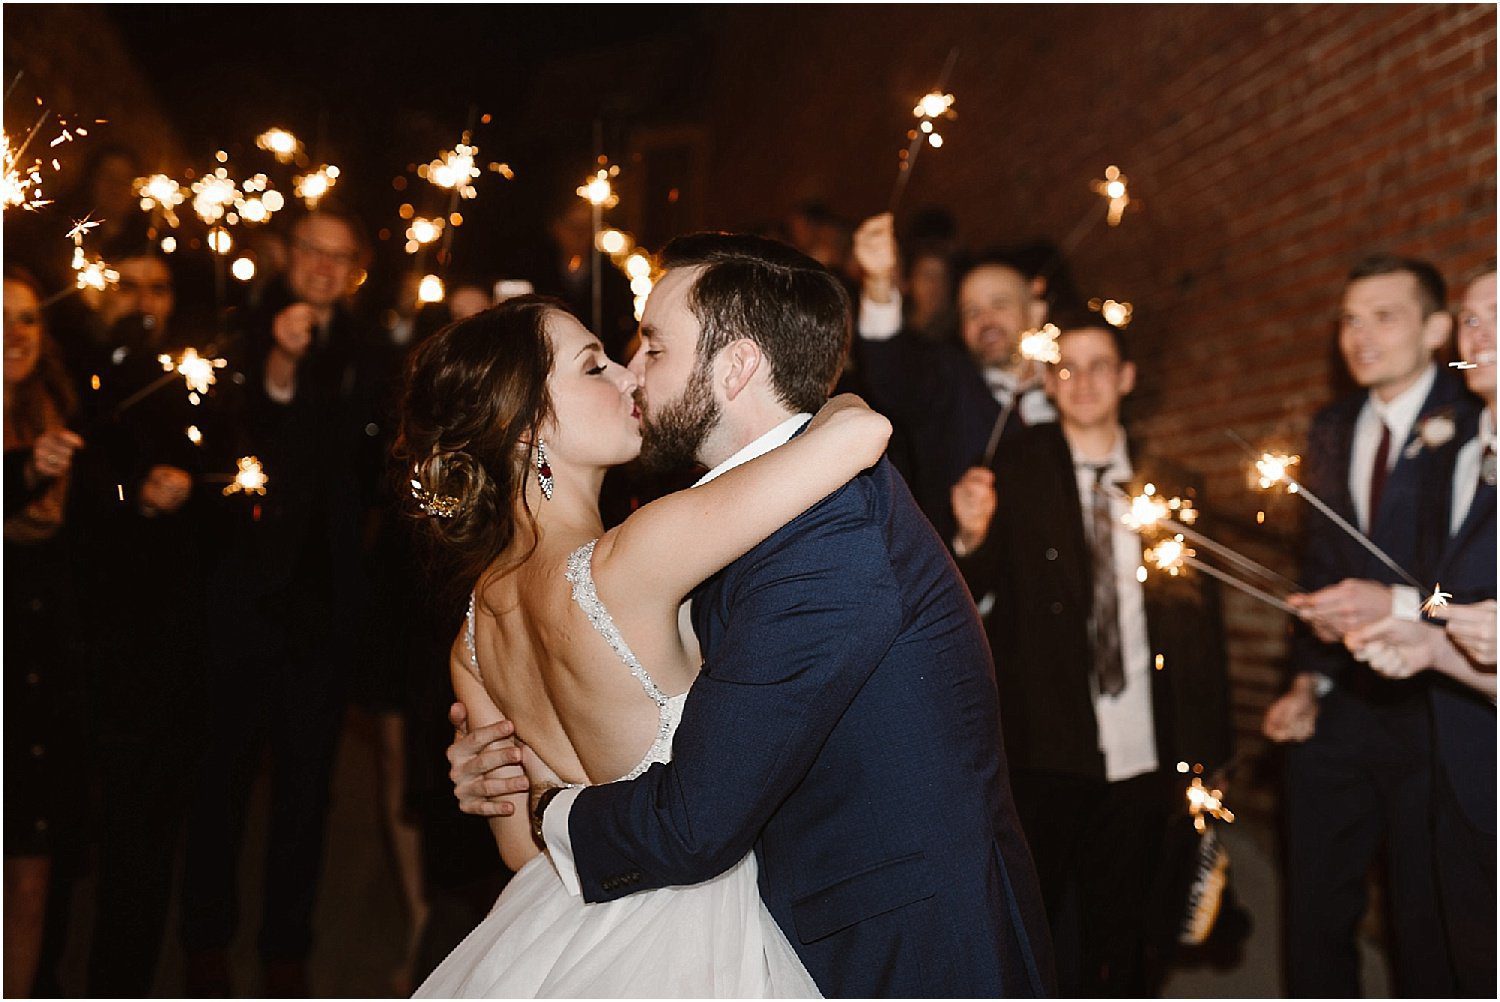 Sparkler Exit Photos at The Standard Knoxville by Erin Morrison Photography